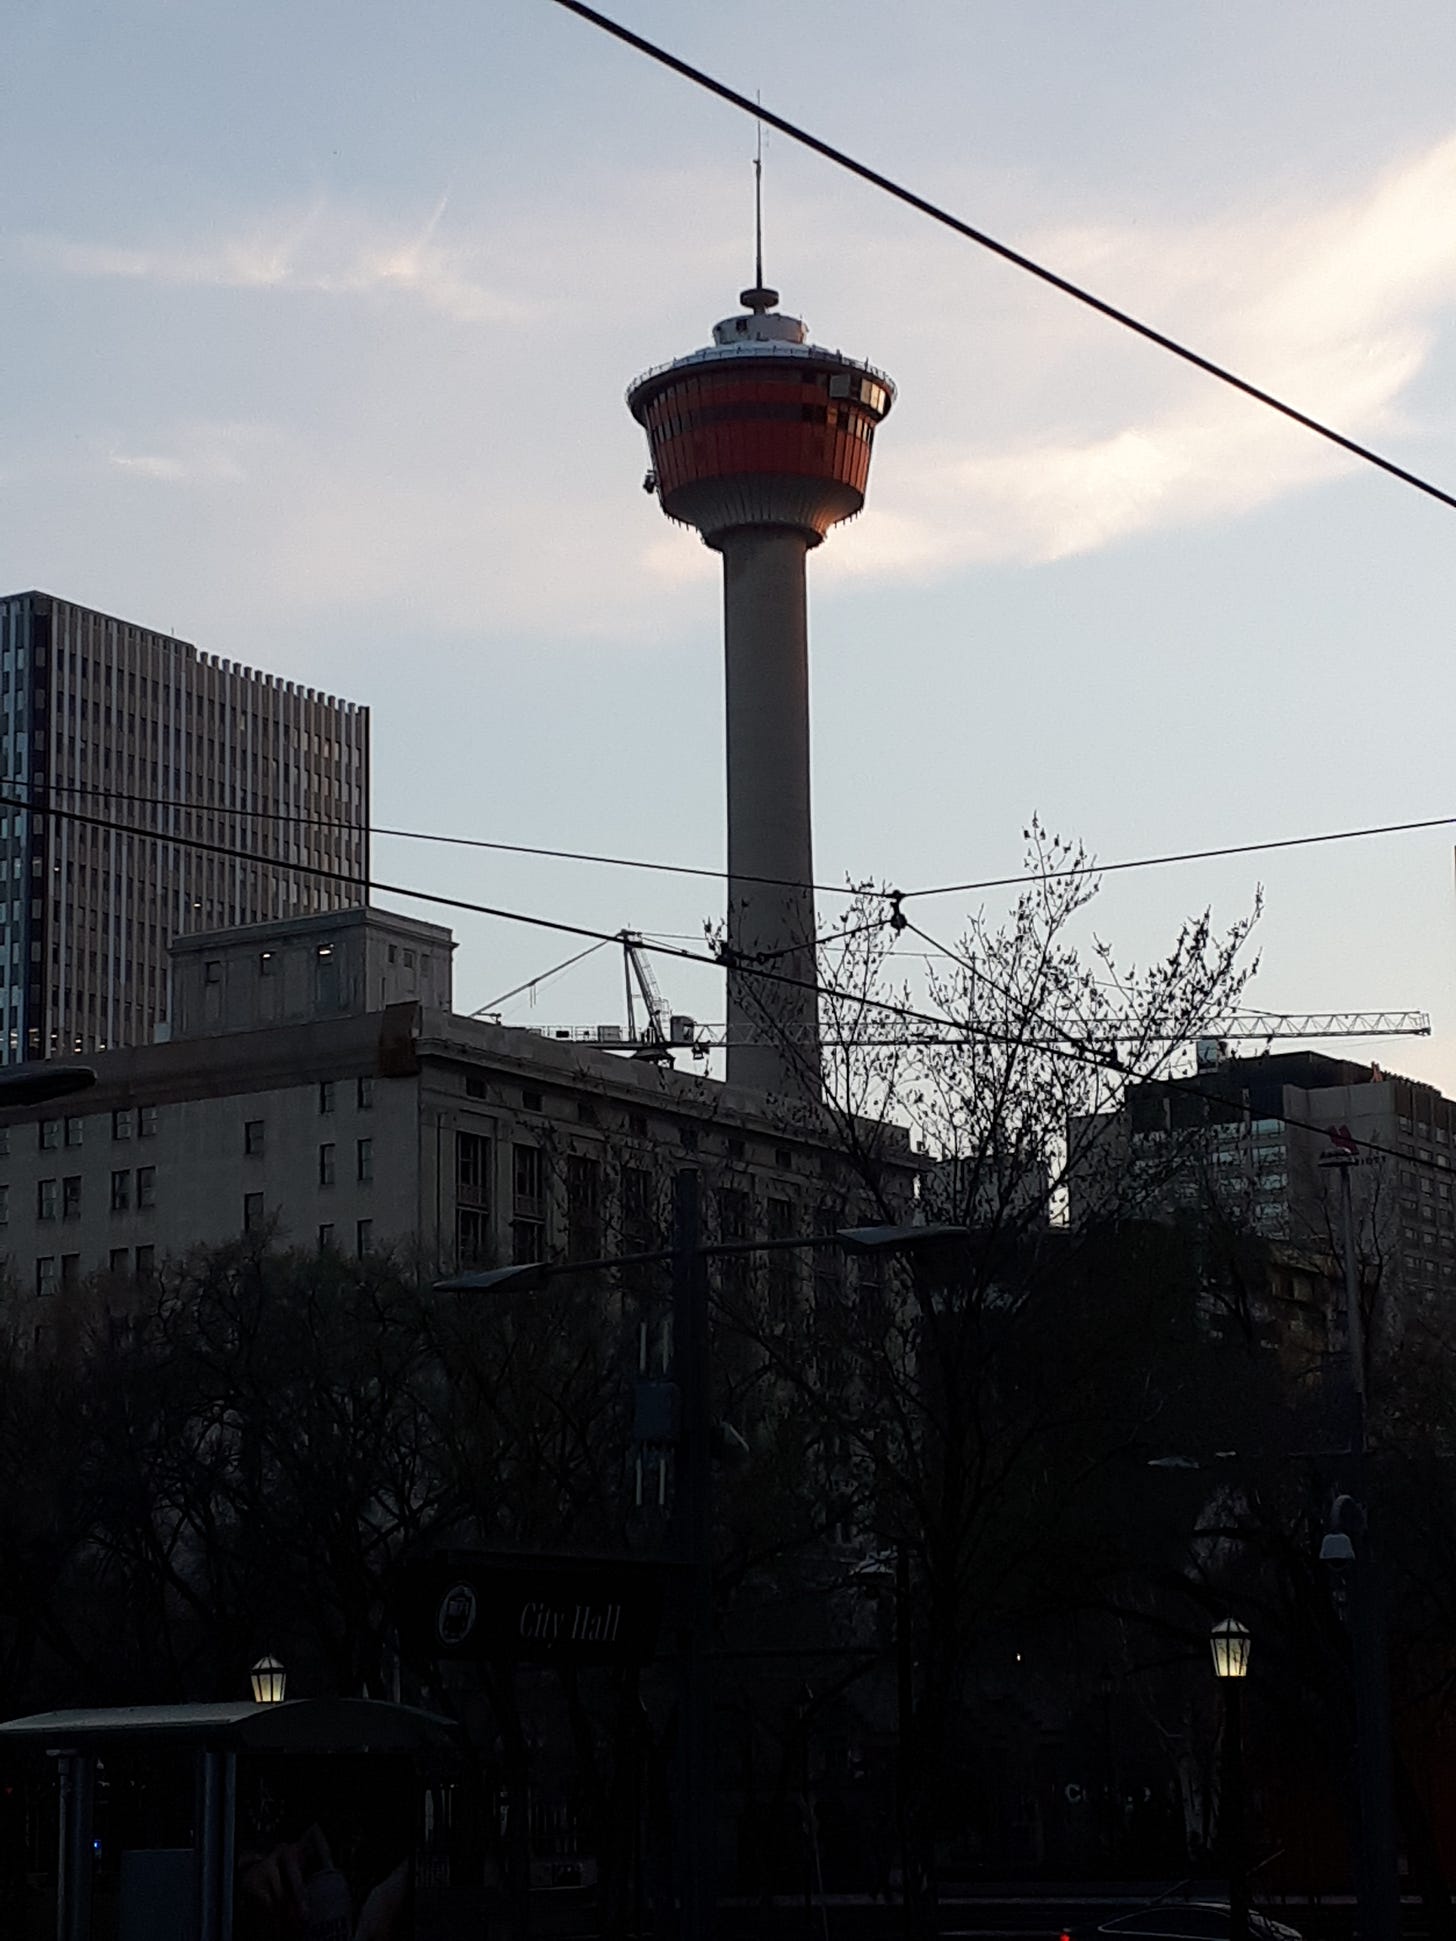 The Calgary Tower with downtown buildings in the foreground.